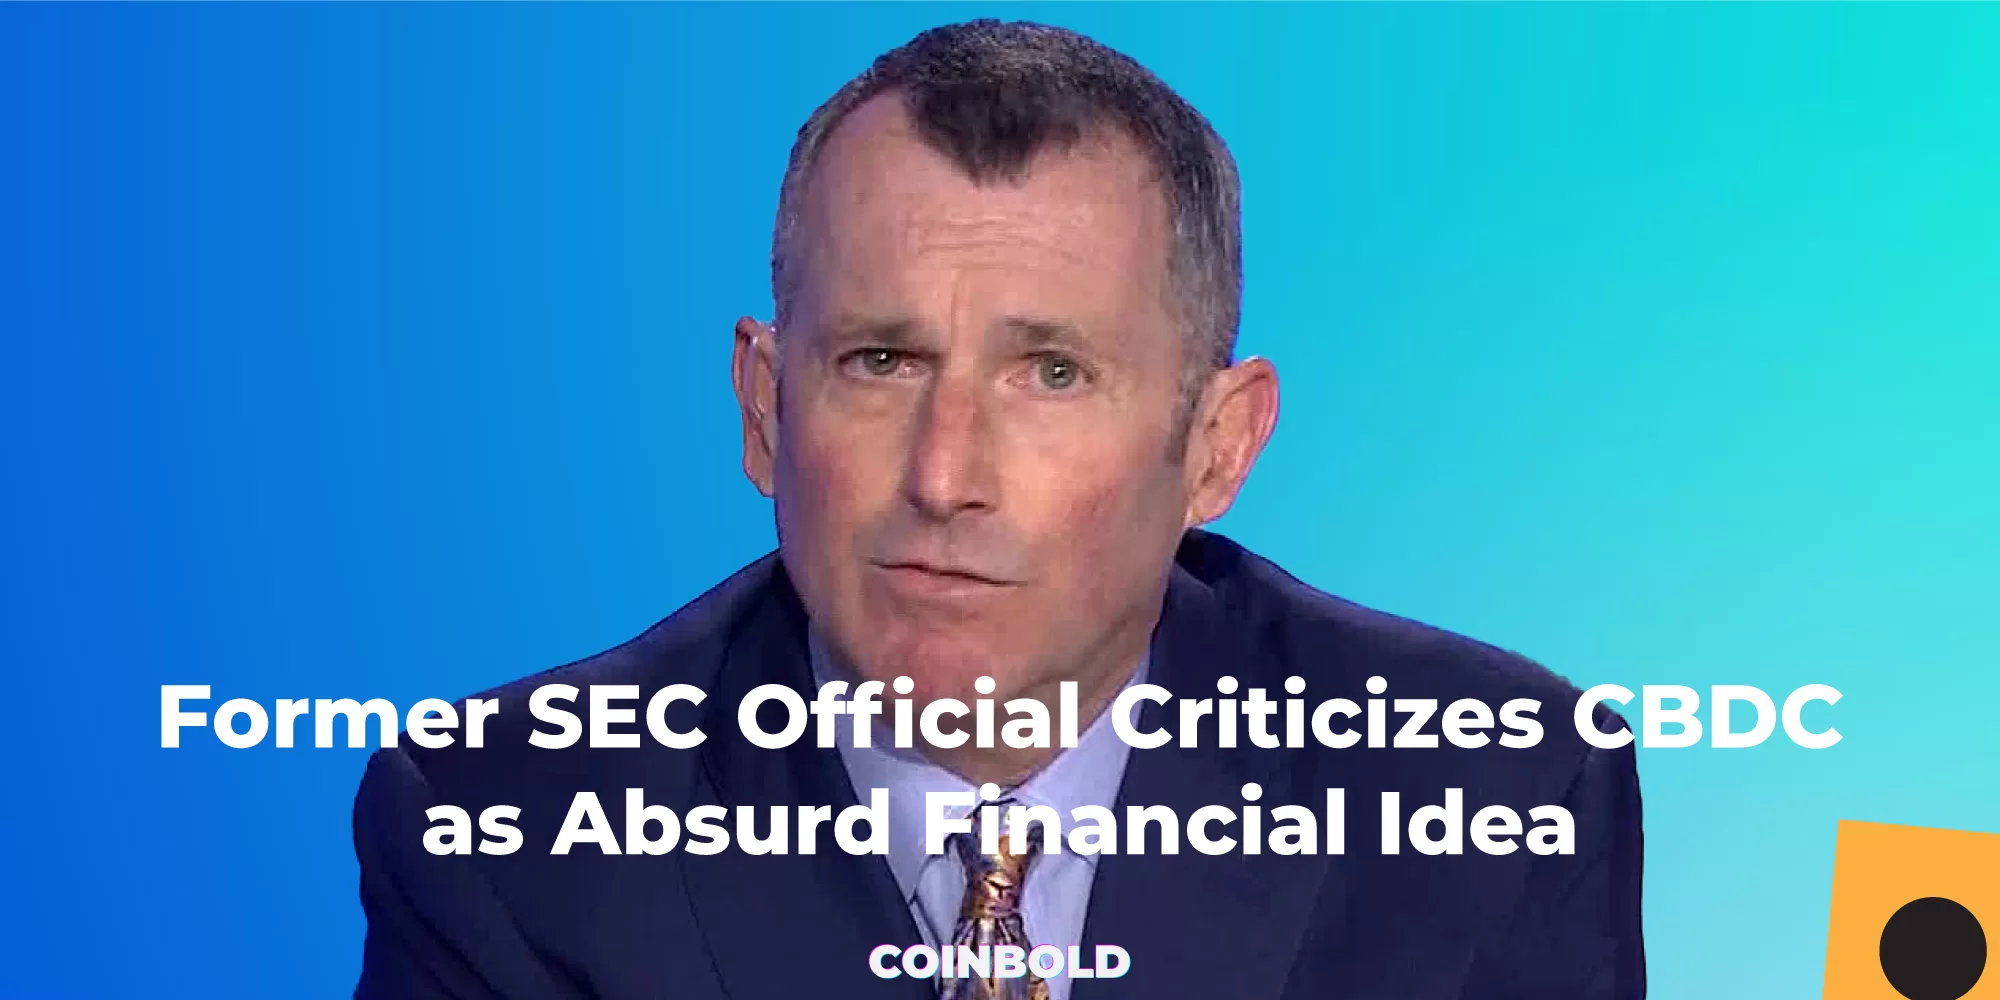 Former SEC Official Criticizes Central Bank Digital Currency (CBDC) as Absurd Financial Idea